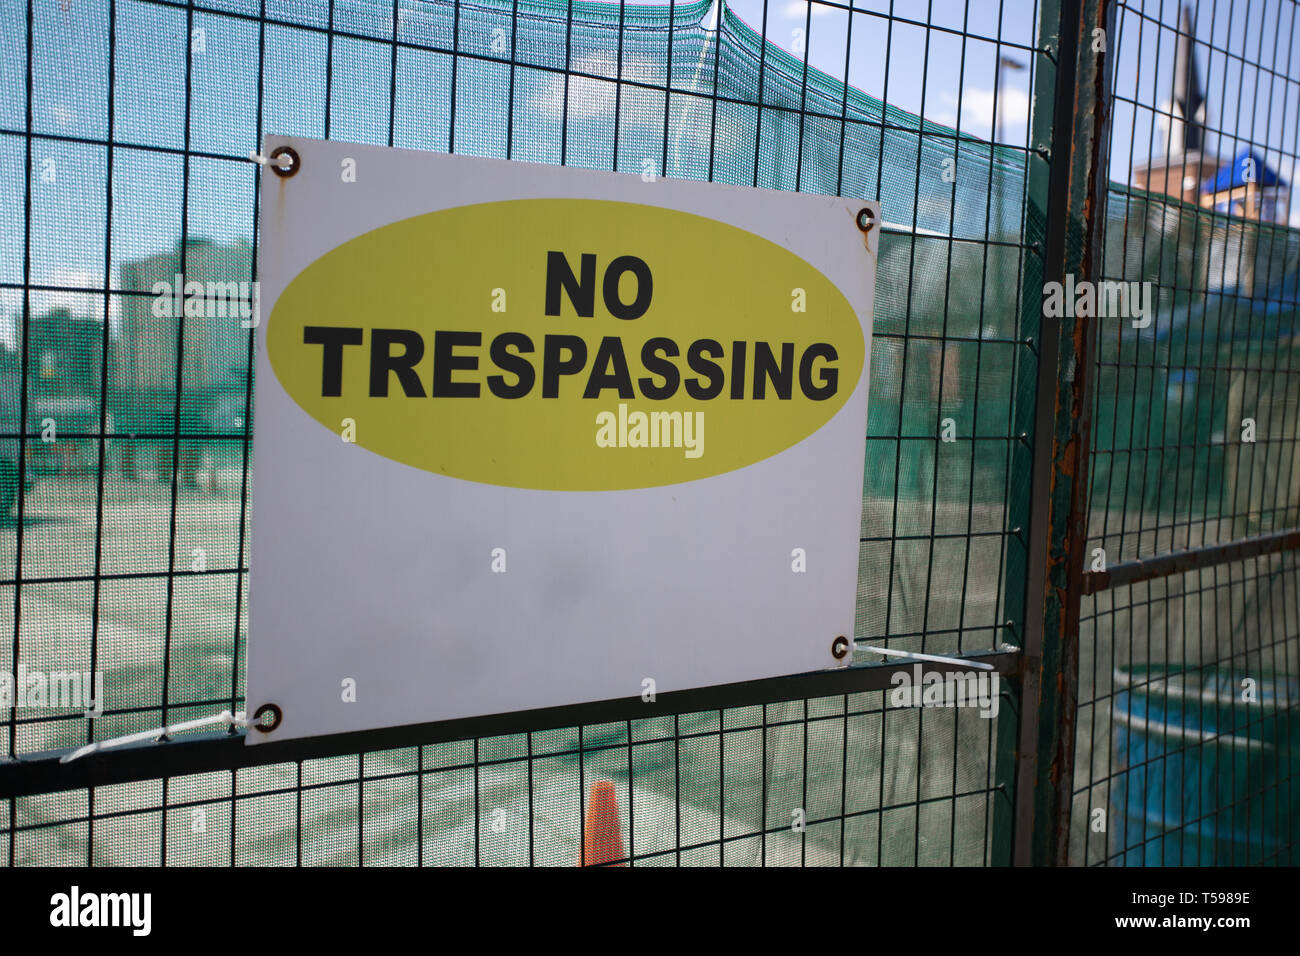 Industry Under Construction Site Fenced Area Fence Sign No Trespassing Stock Photo